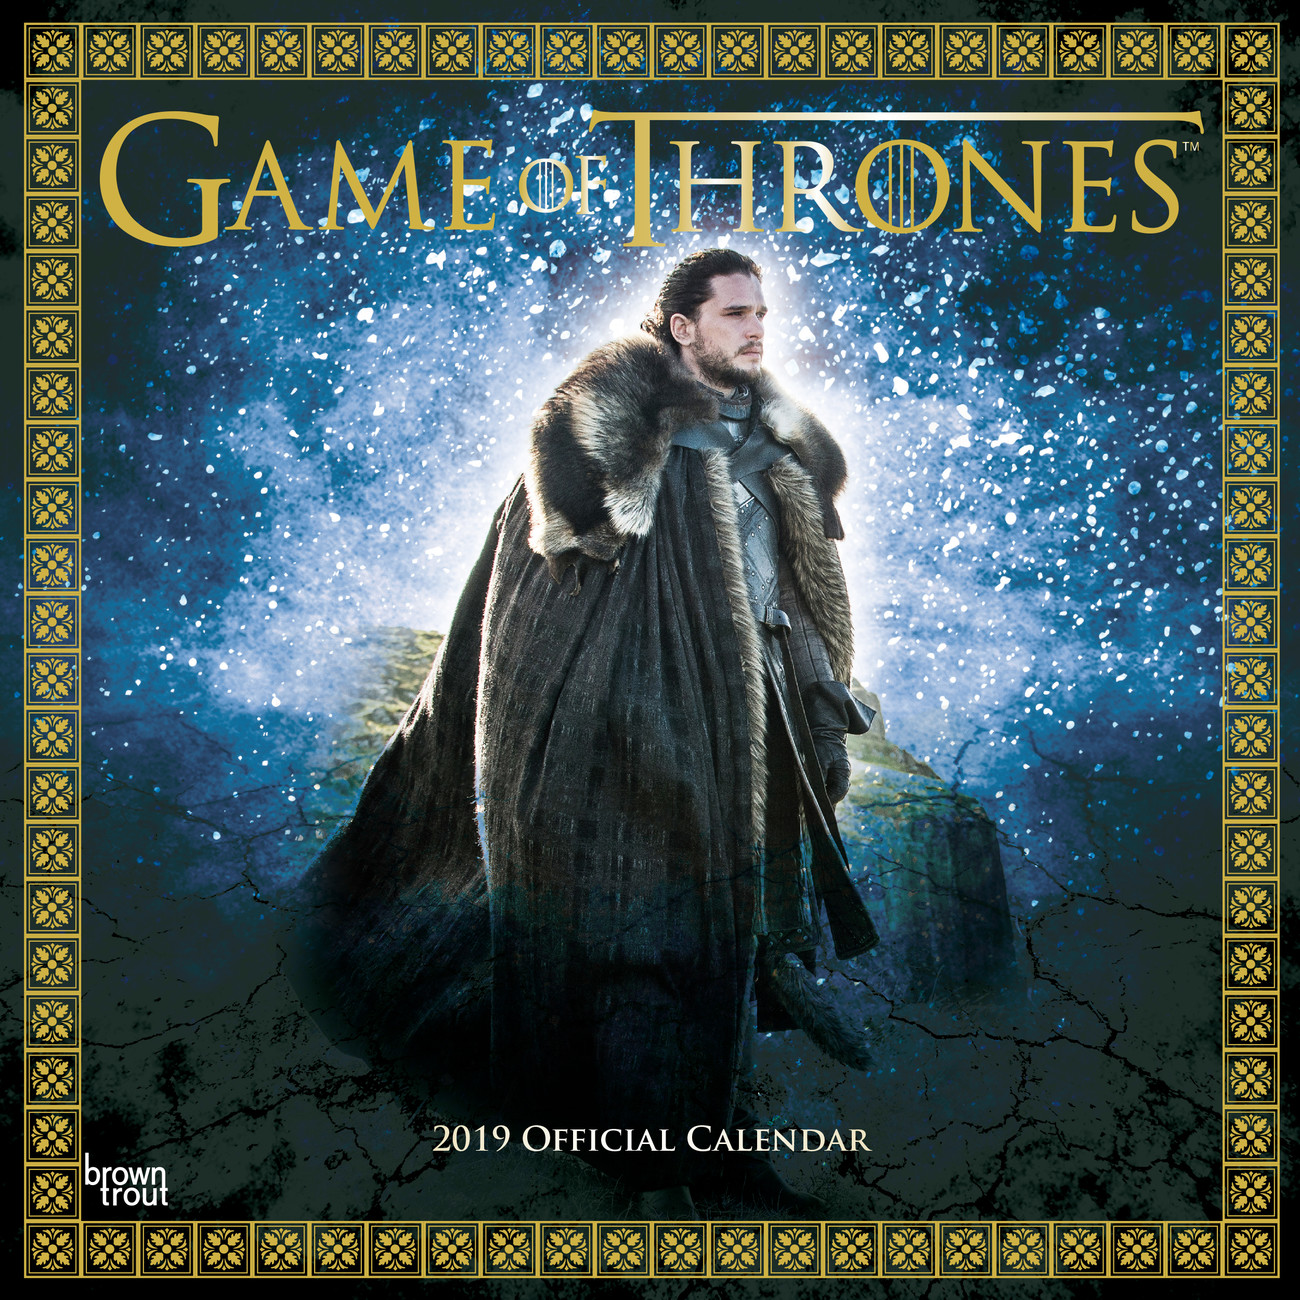 Game Of Thrones Calendars on UKposters/UKposters